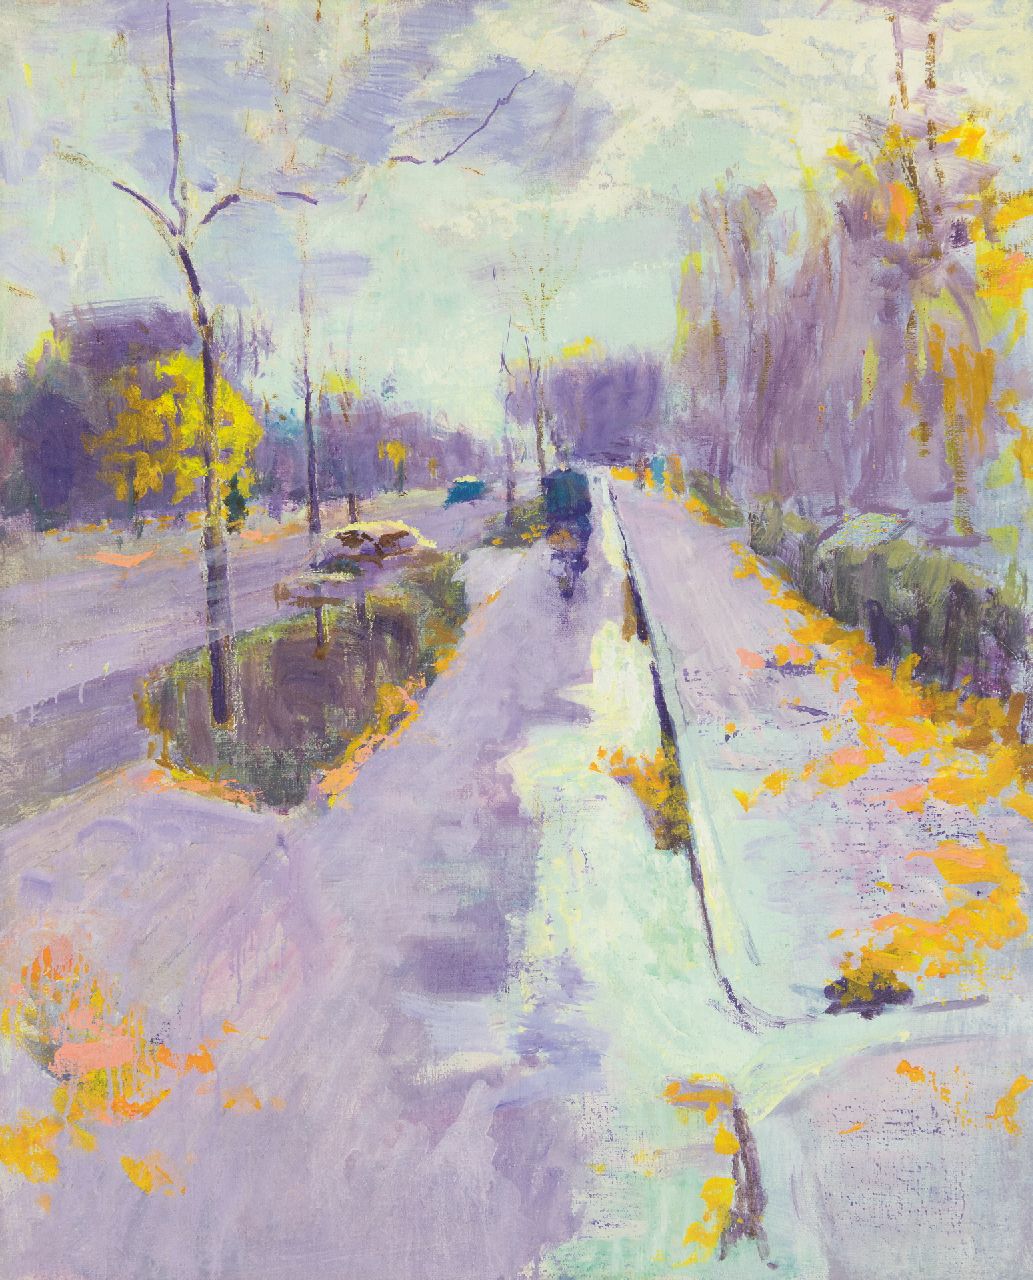 Altink J.  | Jan Altink, Cyclist on the Herenweg in Groningen, oil on canvas 100.4 x 80.1 cm, painted end 1920's